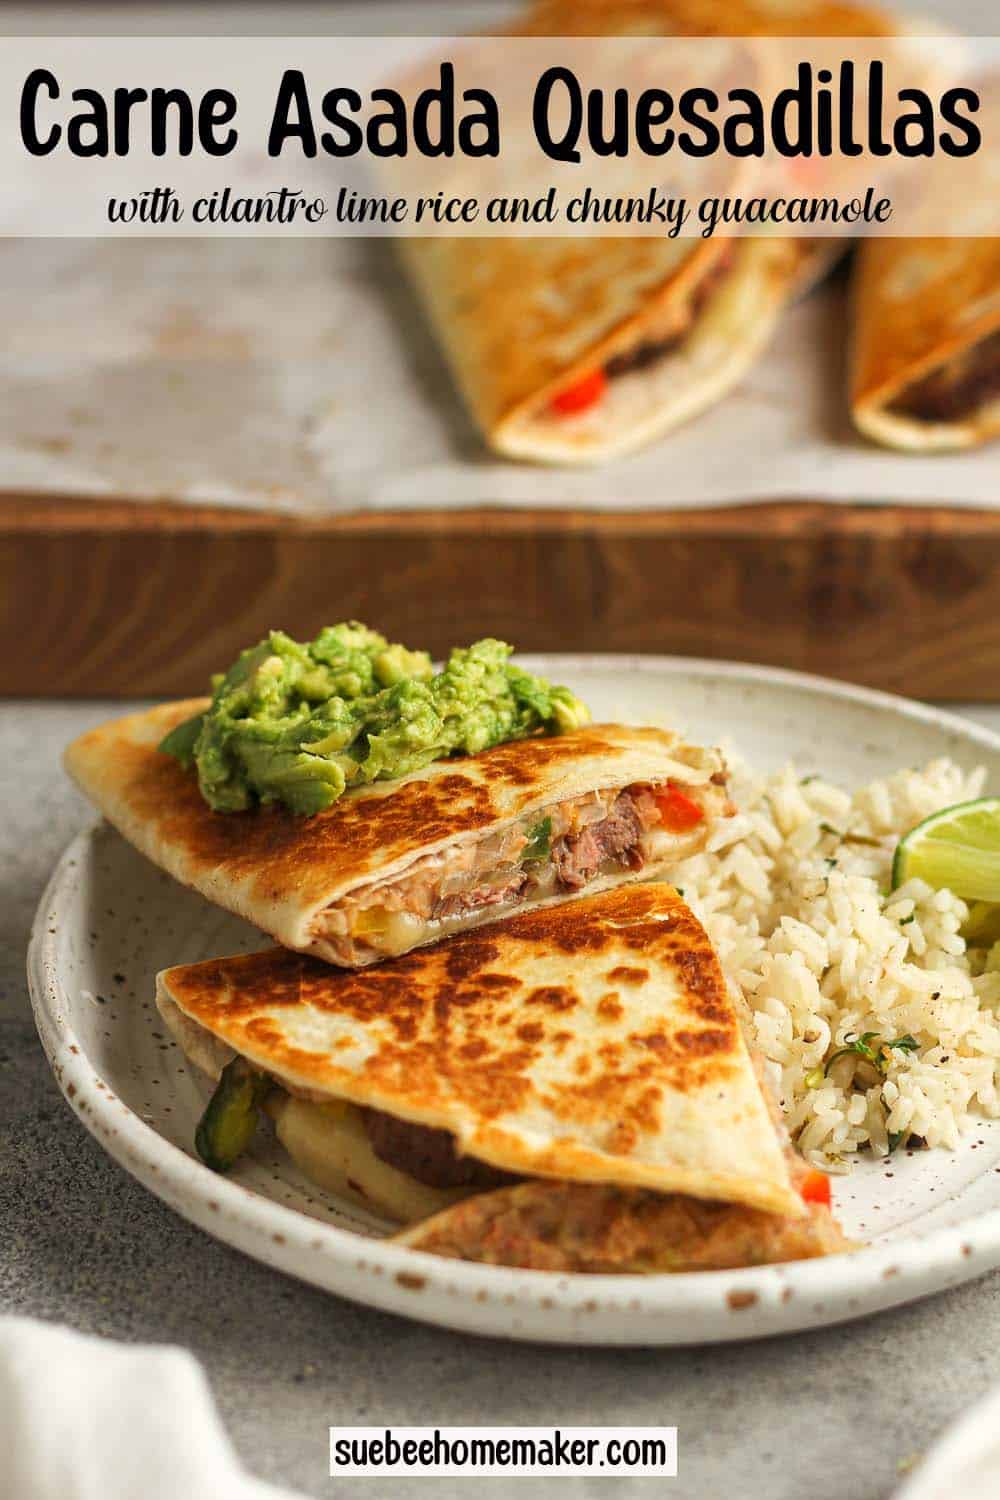 A plate of quesadillas, rice, and guacamole.